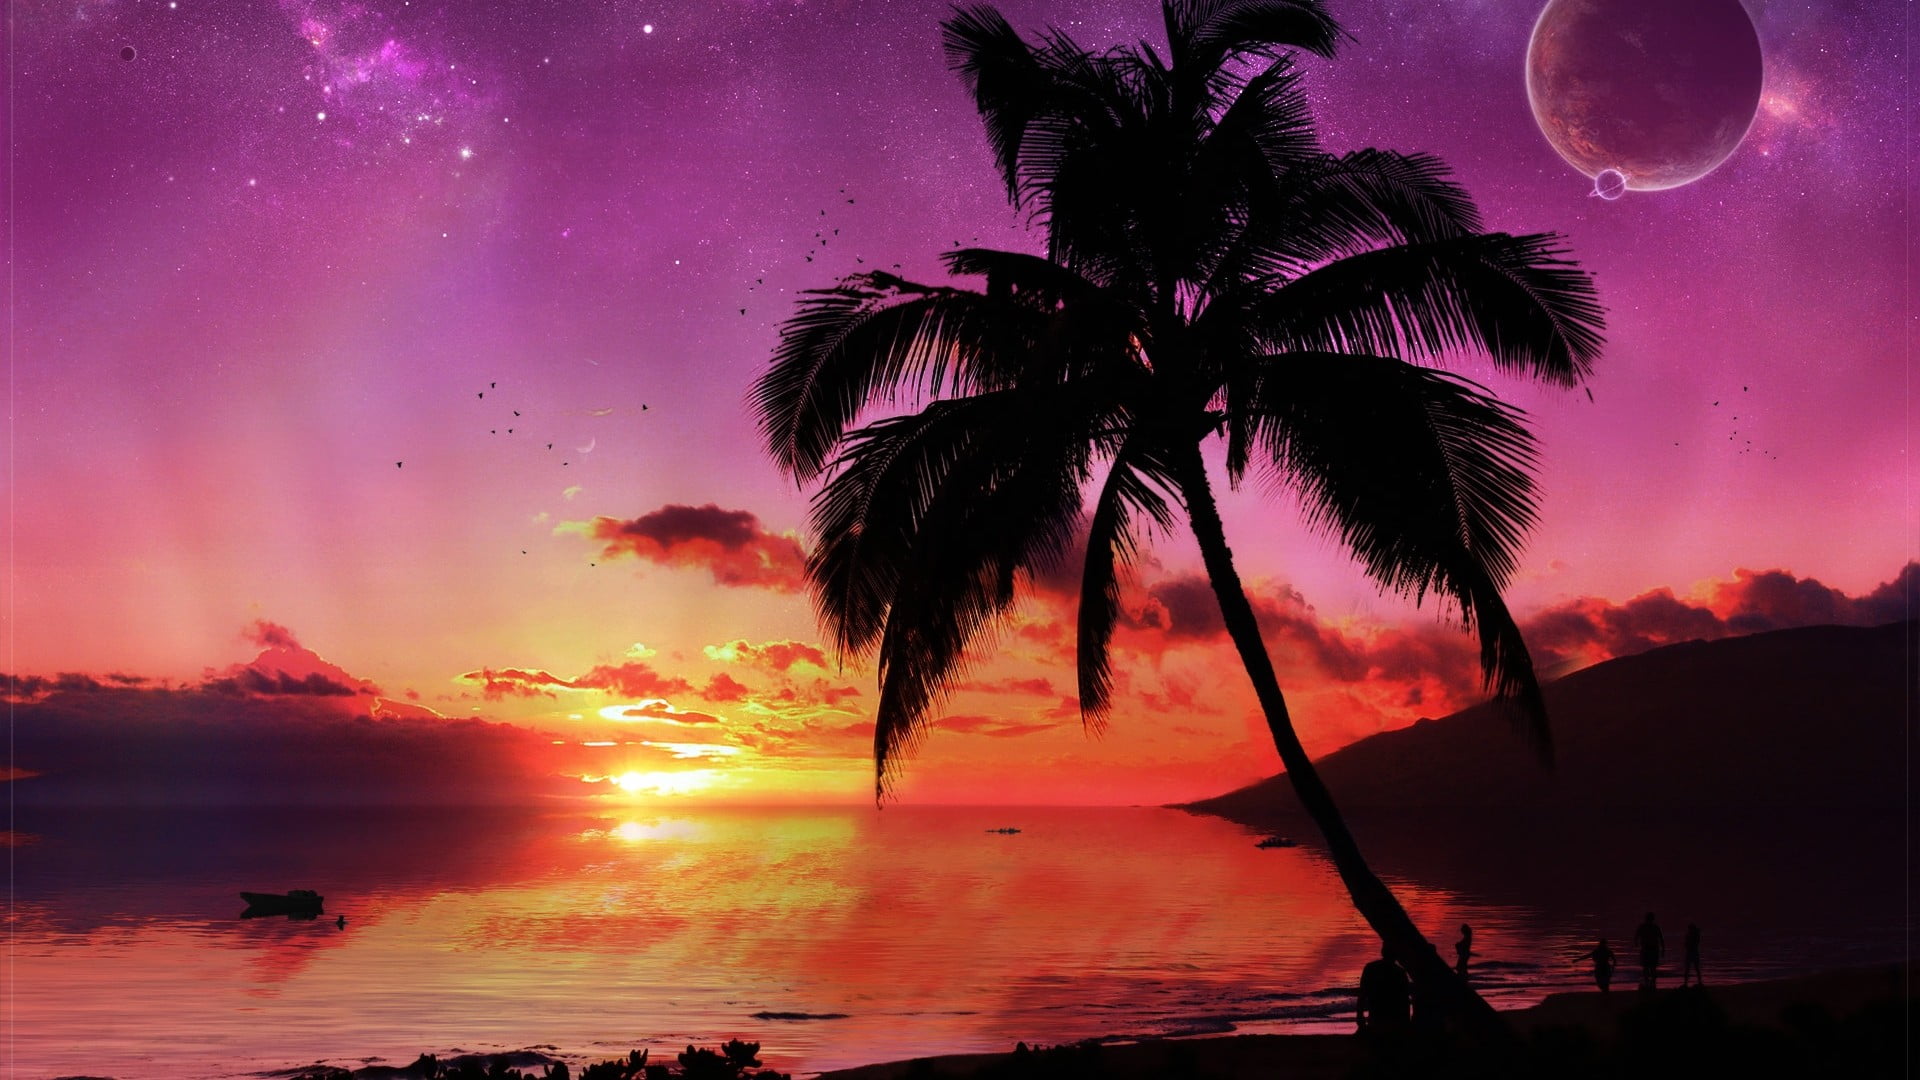 silhouette of coconut tree during golden hour painting, sunset, beach, digital art, space art